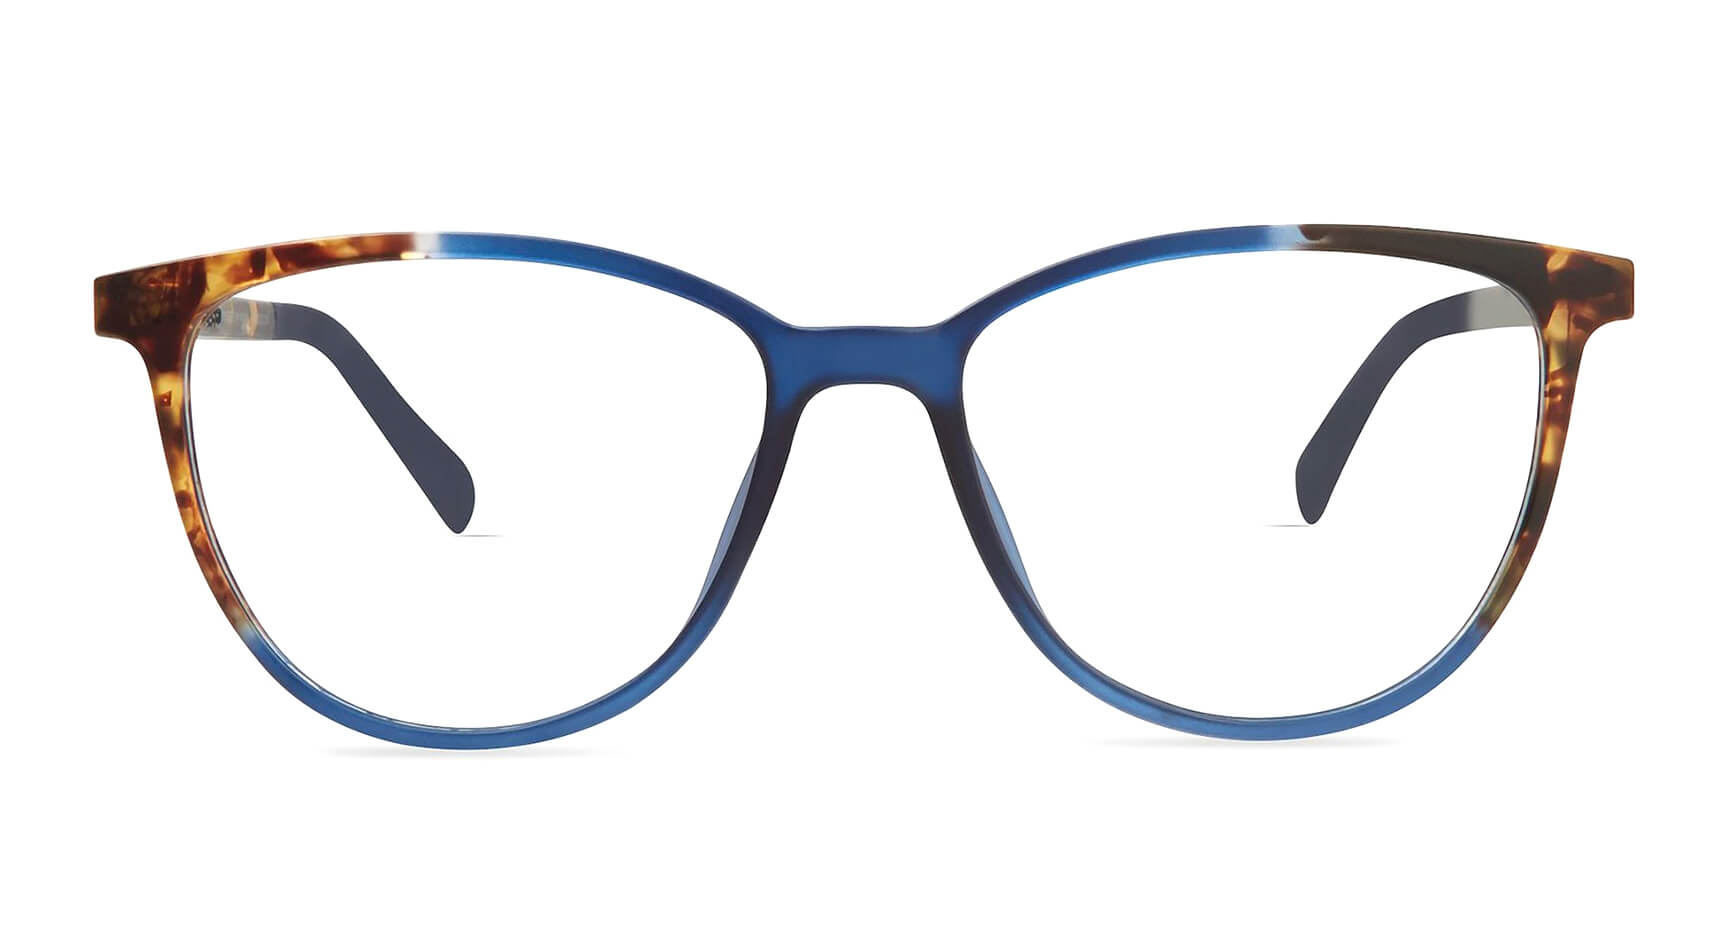 tommy hilfiger womens glasses vision express